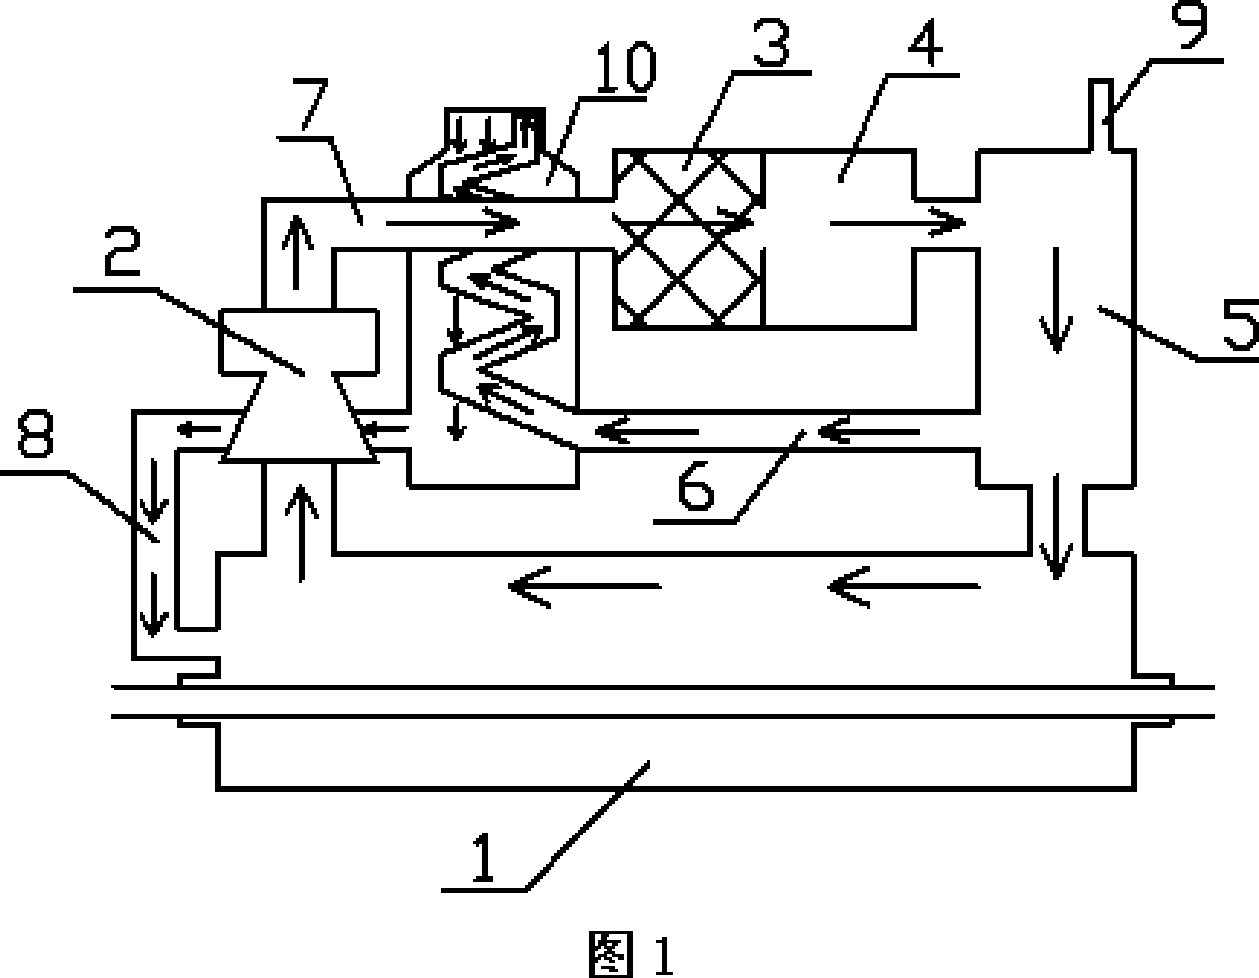 Enameled wire baking hot air circulation method and device